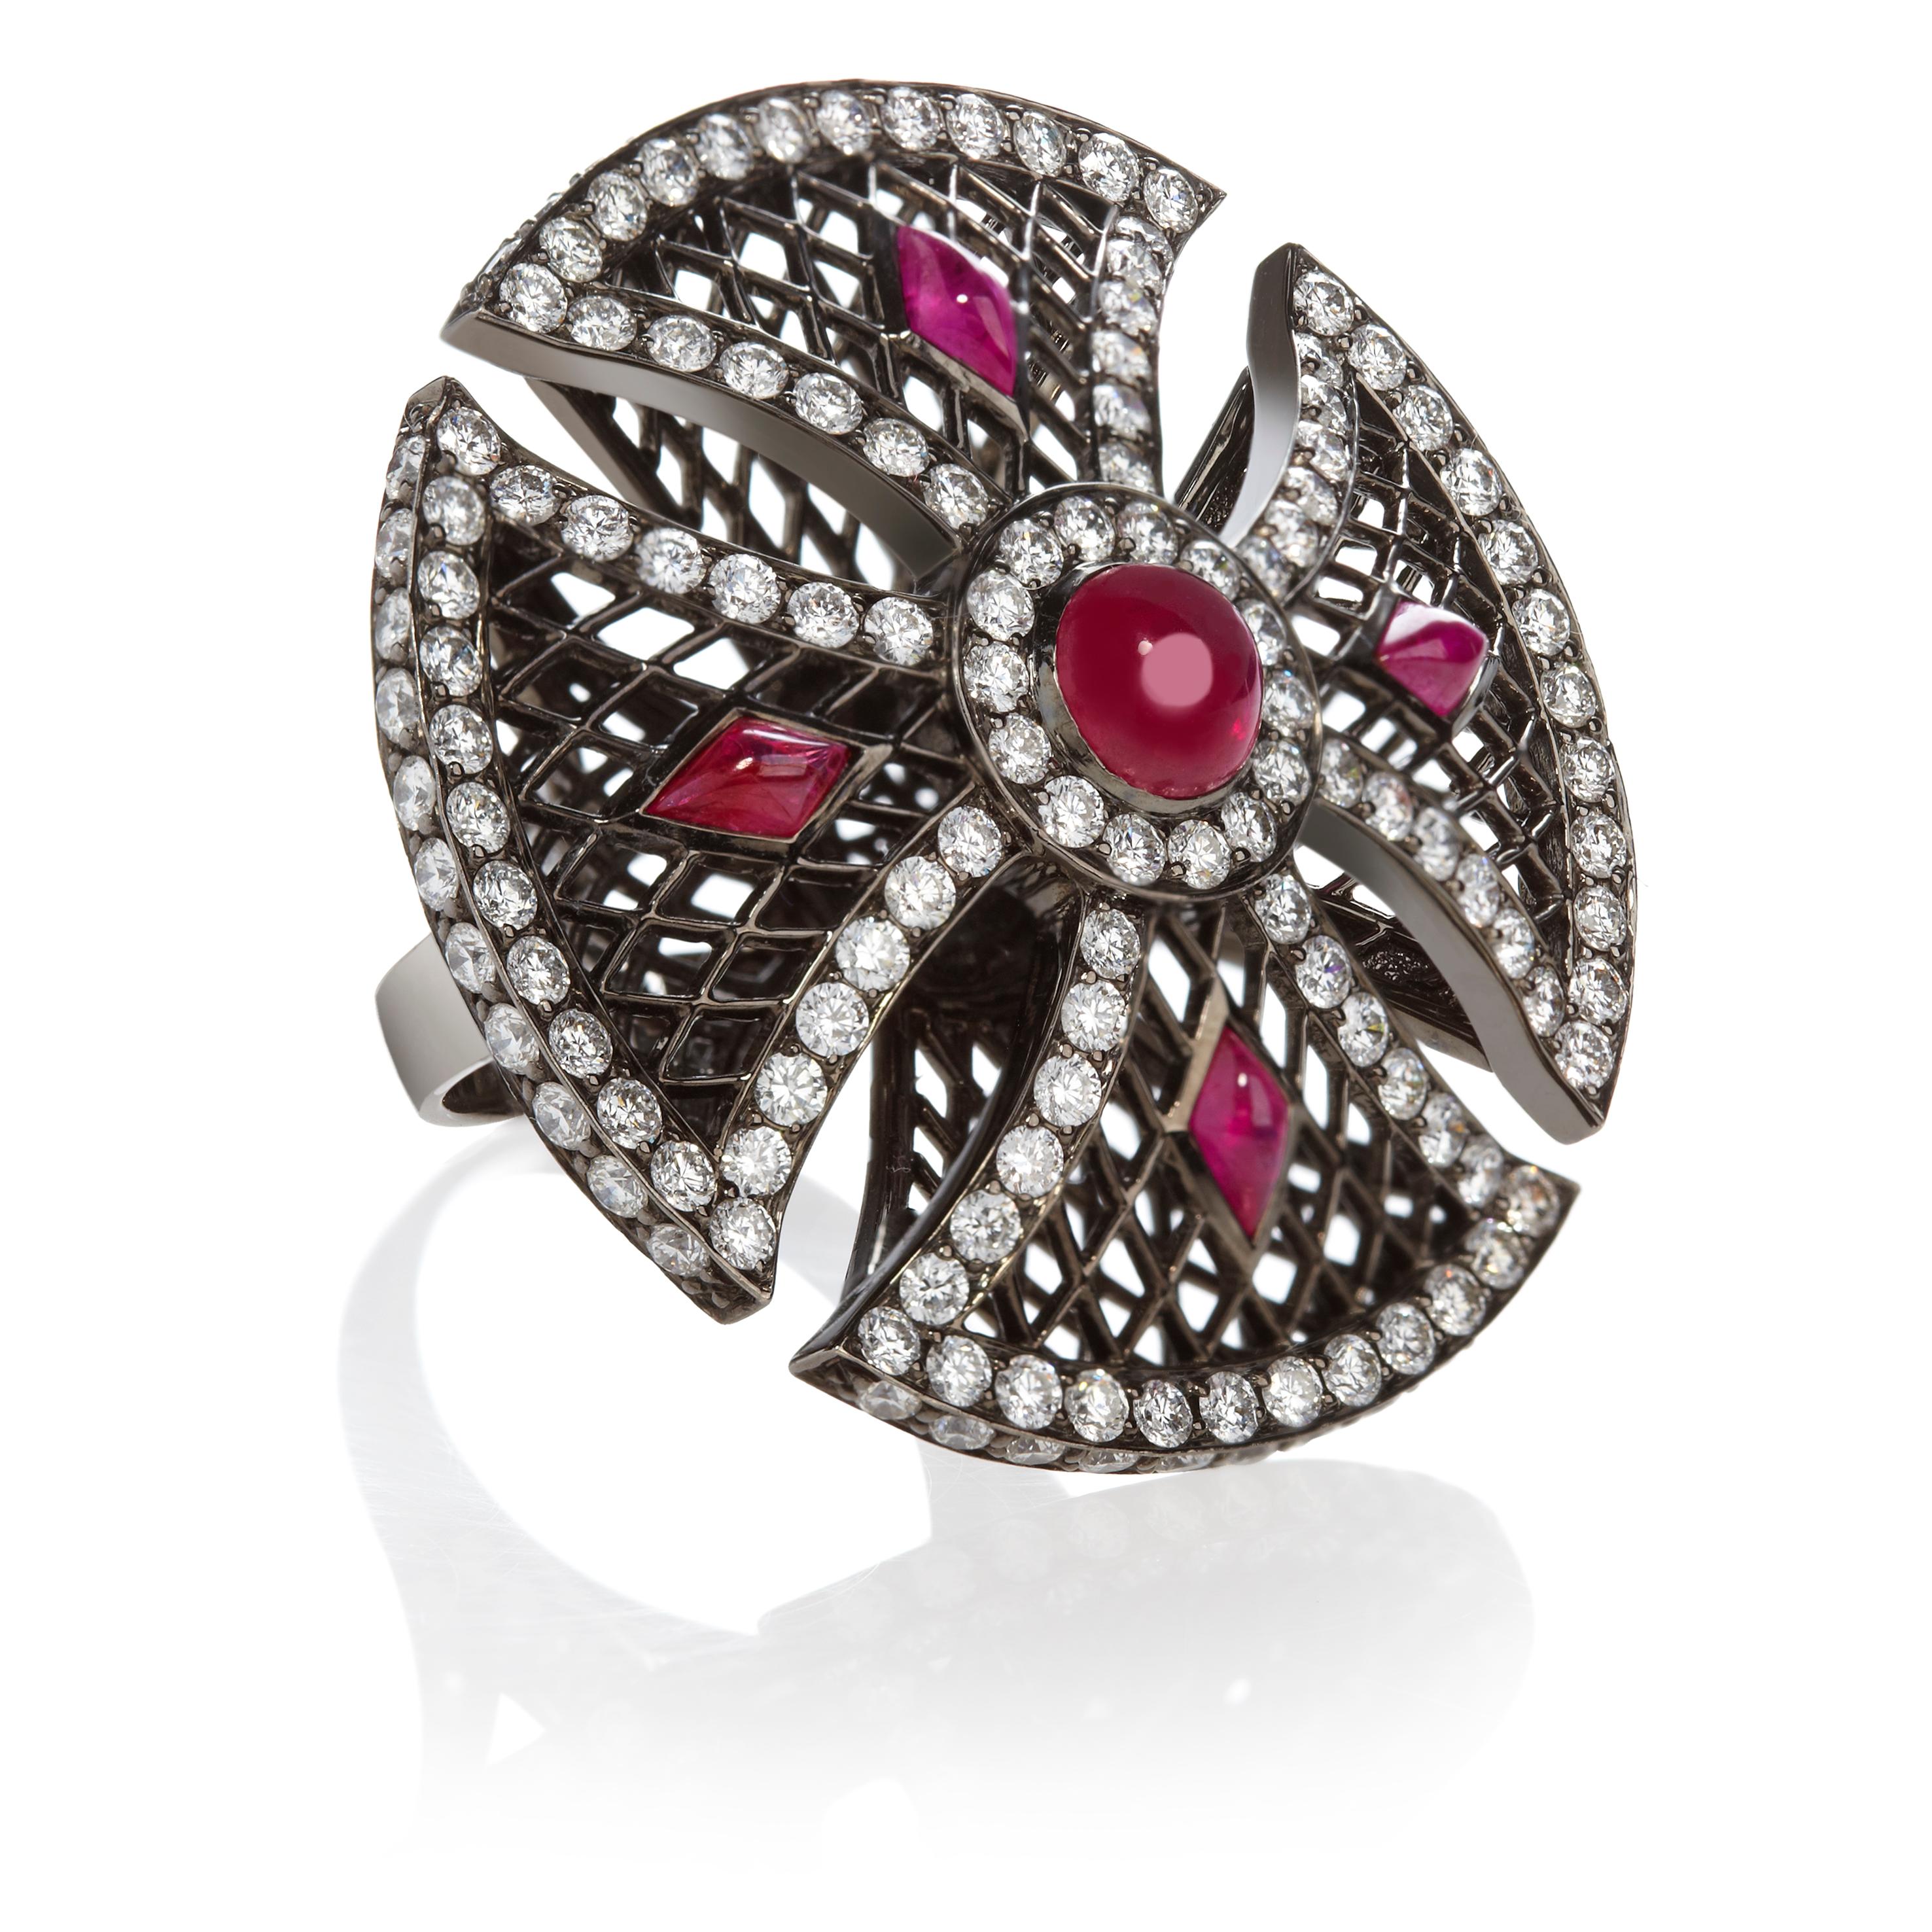 The Sybarite Heritage Collection draws on centuries of tradition and sovereign imagery. Crafted from the finest blackened gold, this piece is set alight with round-cut black diamonds and rubies.

Steeped in heritage, this piece turns to the Maltese